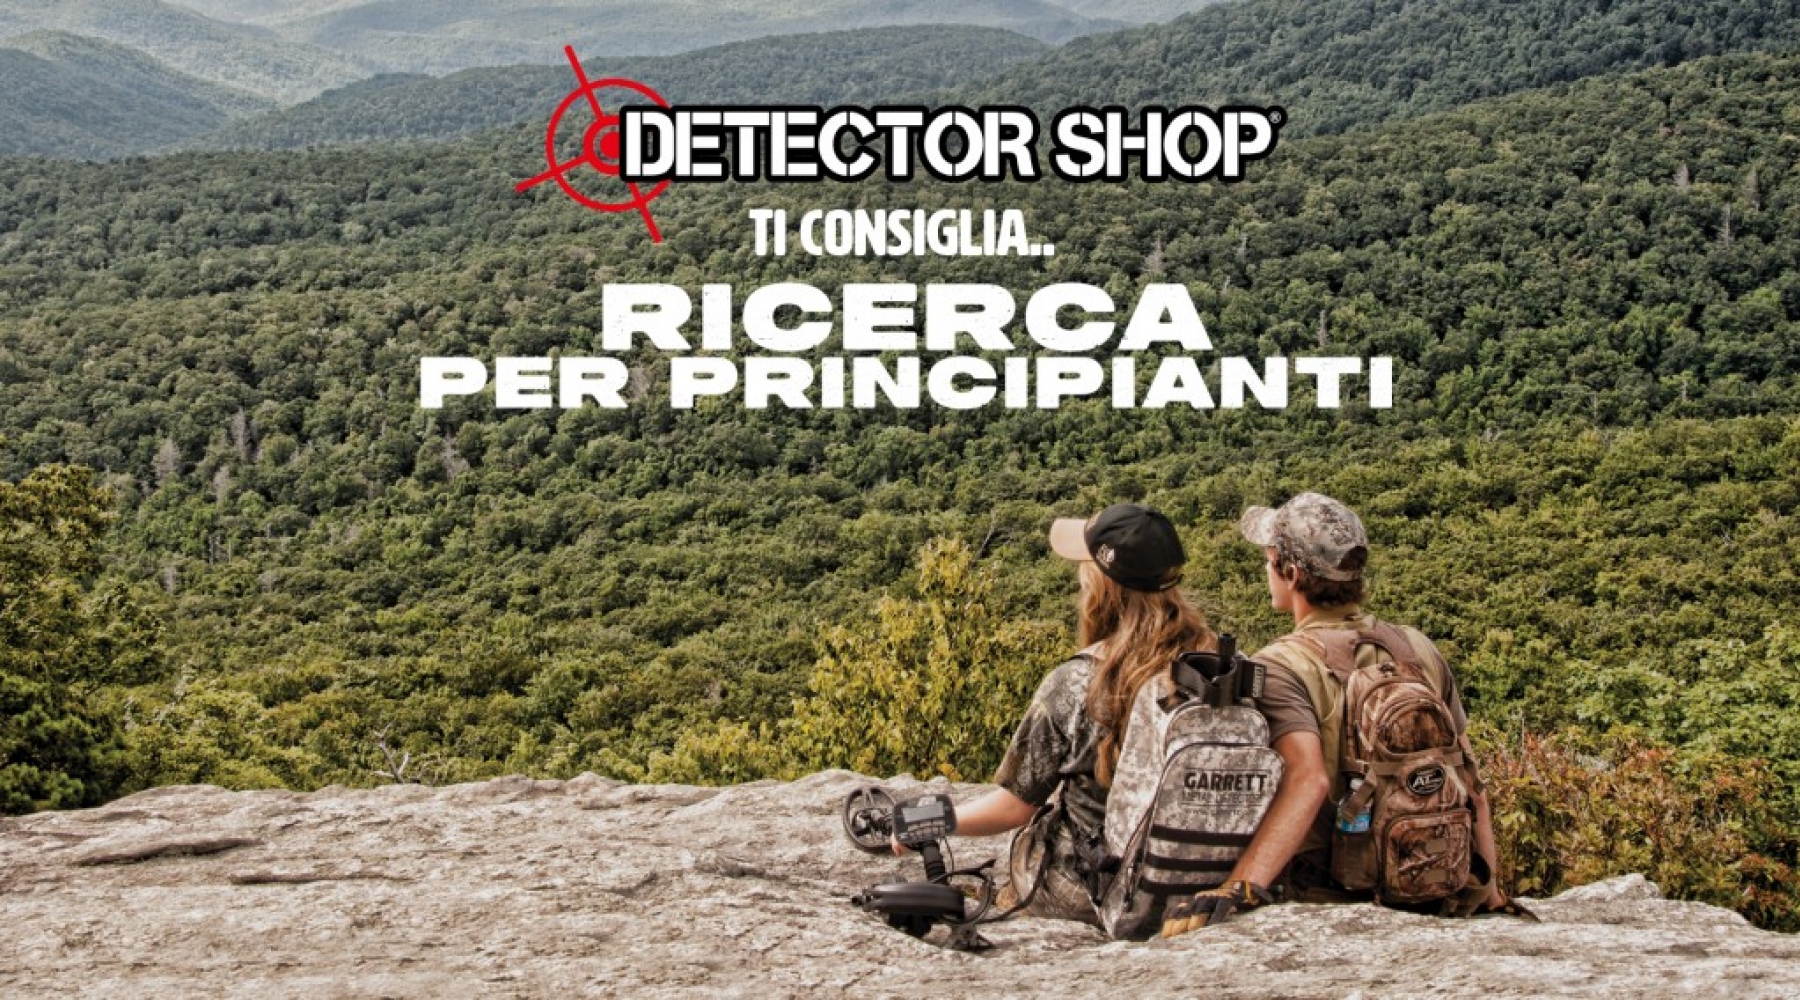 DetectorShop gives you tip on... Detecting for Beginners